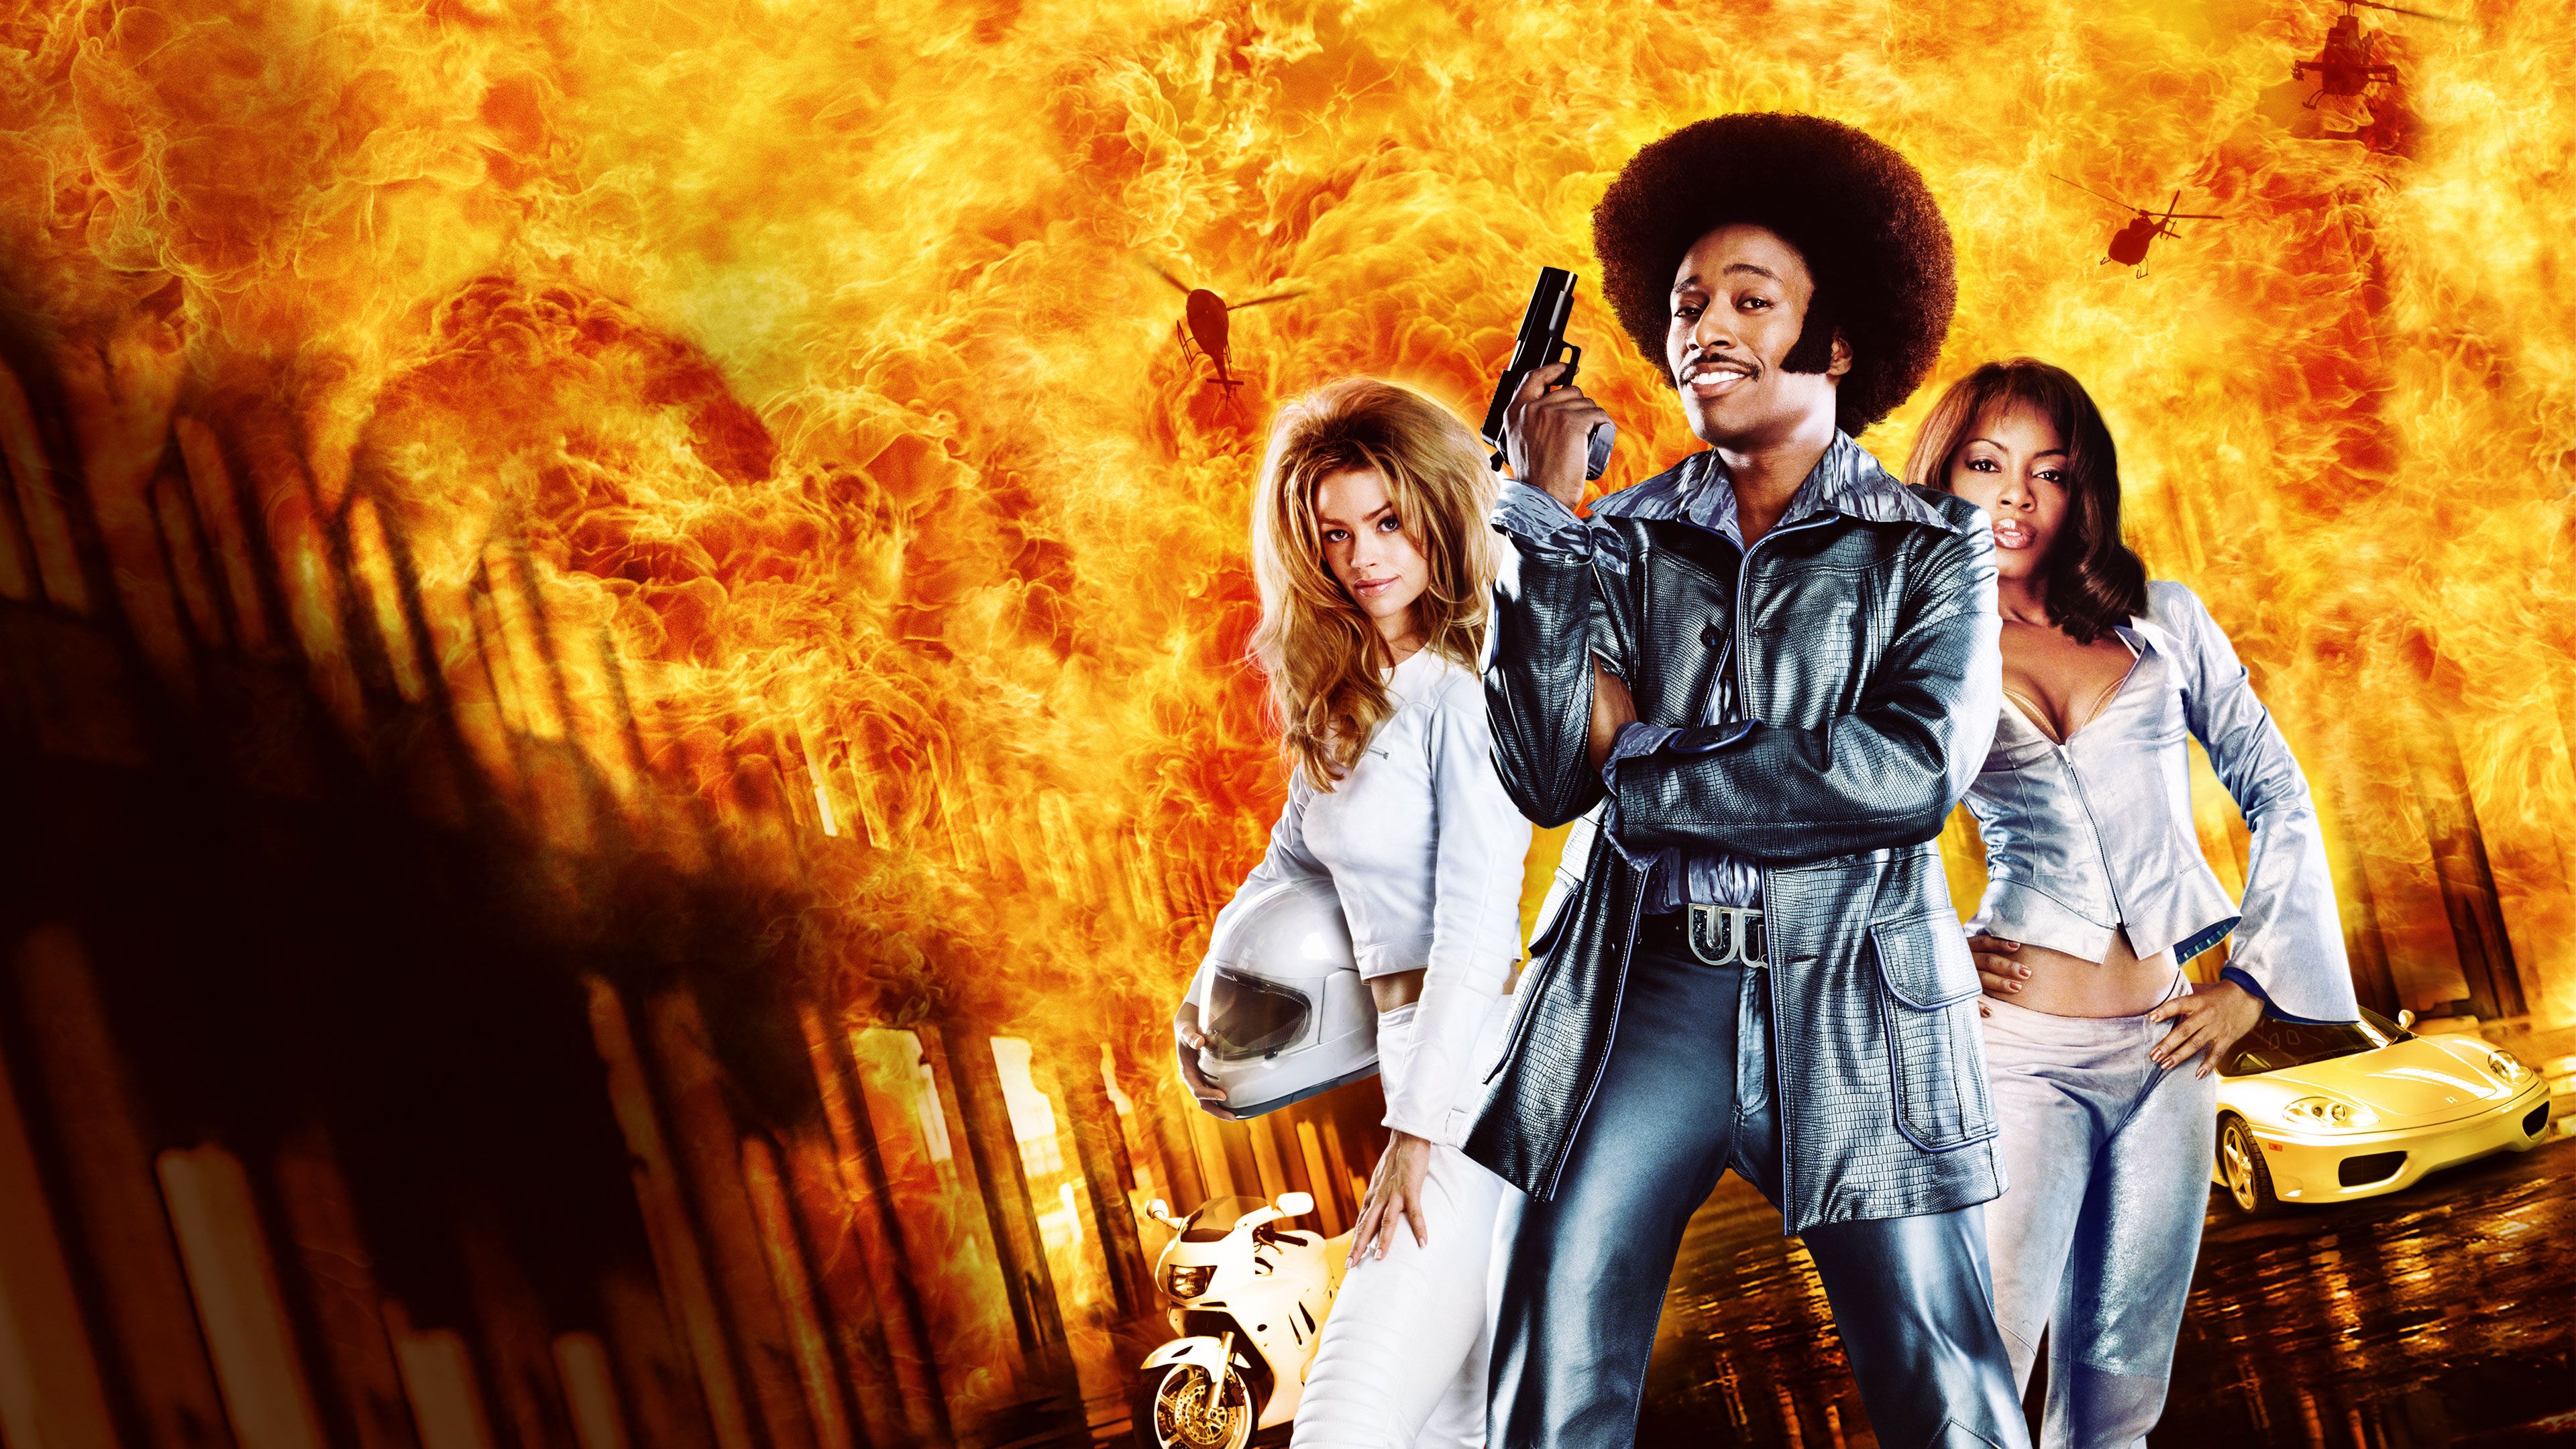 chandika rai recommends undercover brother full movie pic